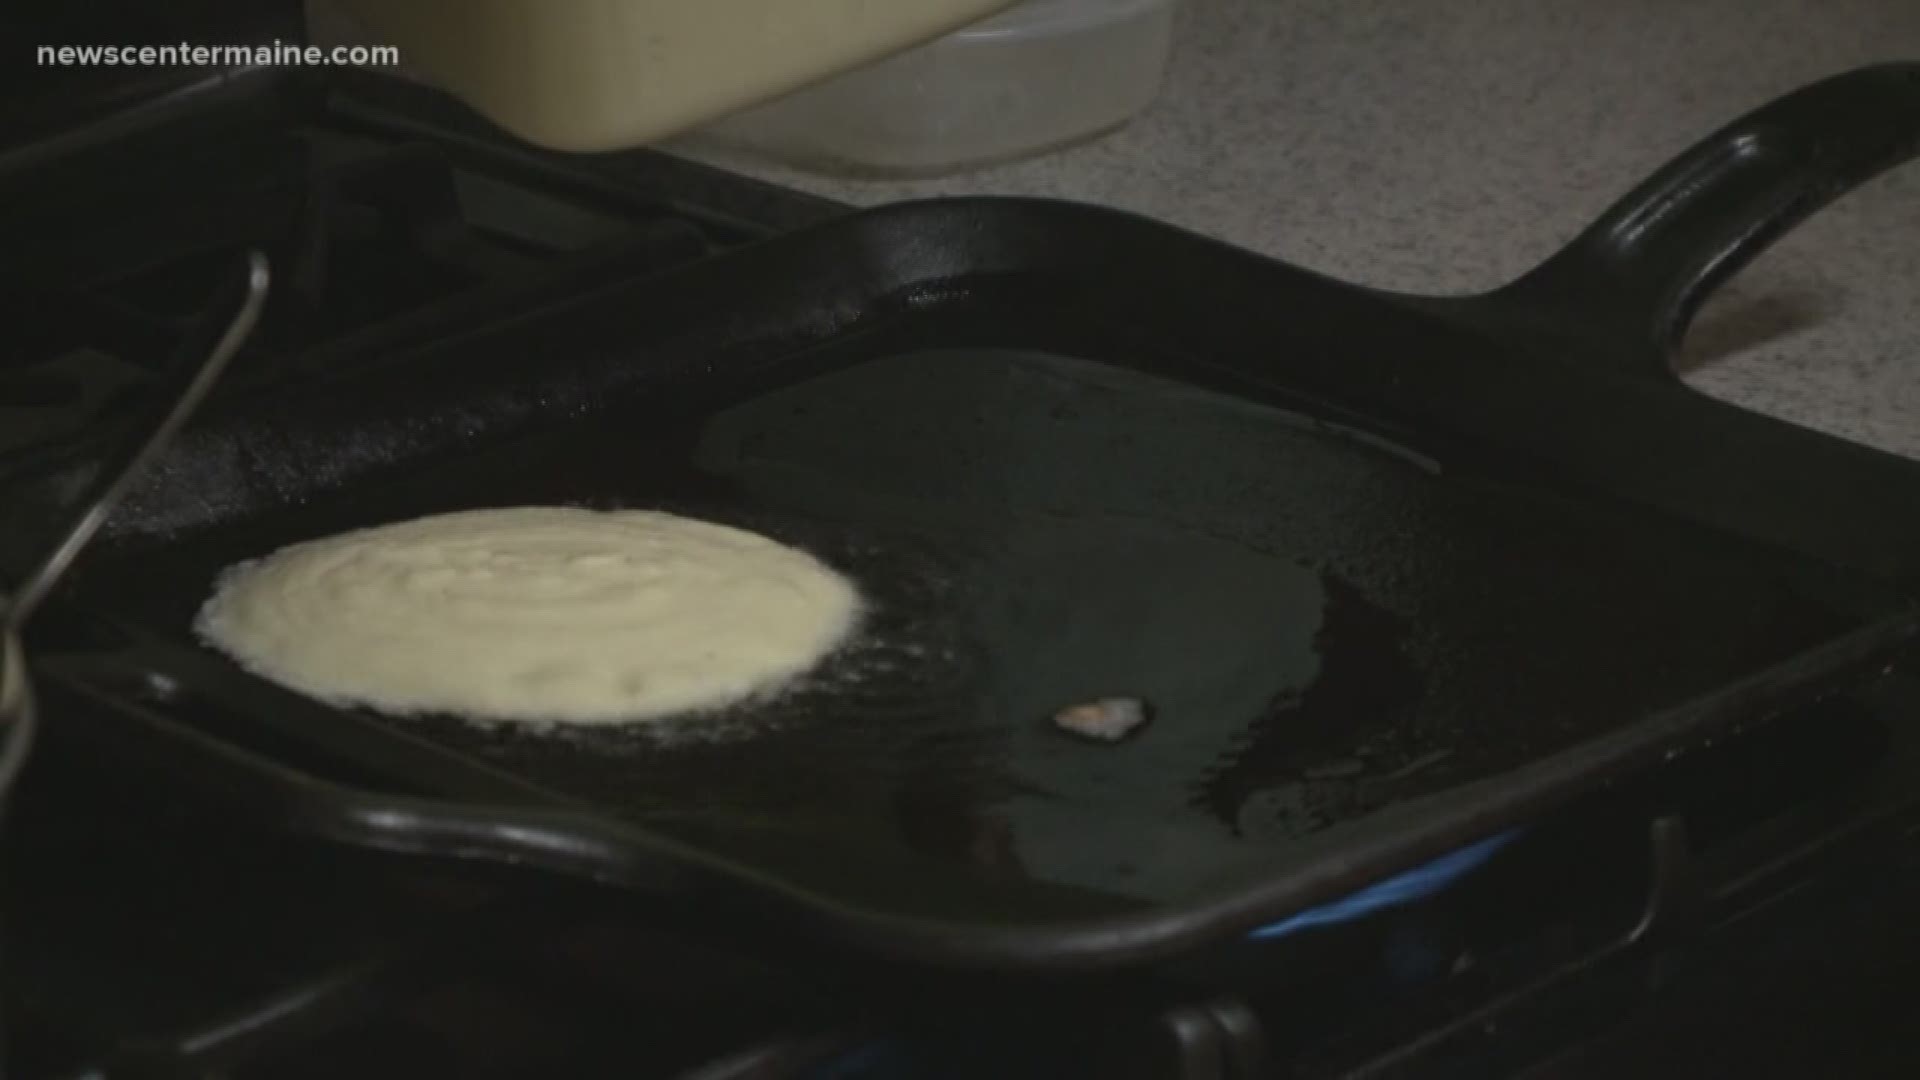 Chef Elliott Farmer of Food Network fame cooks up corn meal pancakes he calls Hoe Cakes